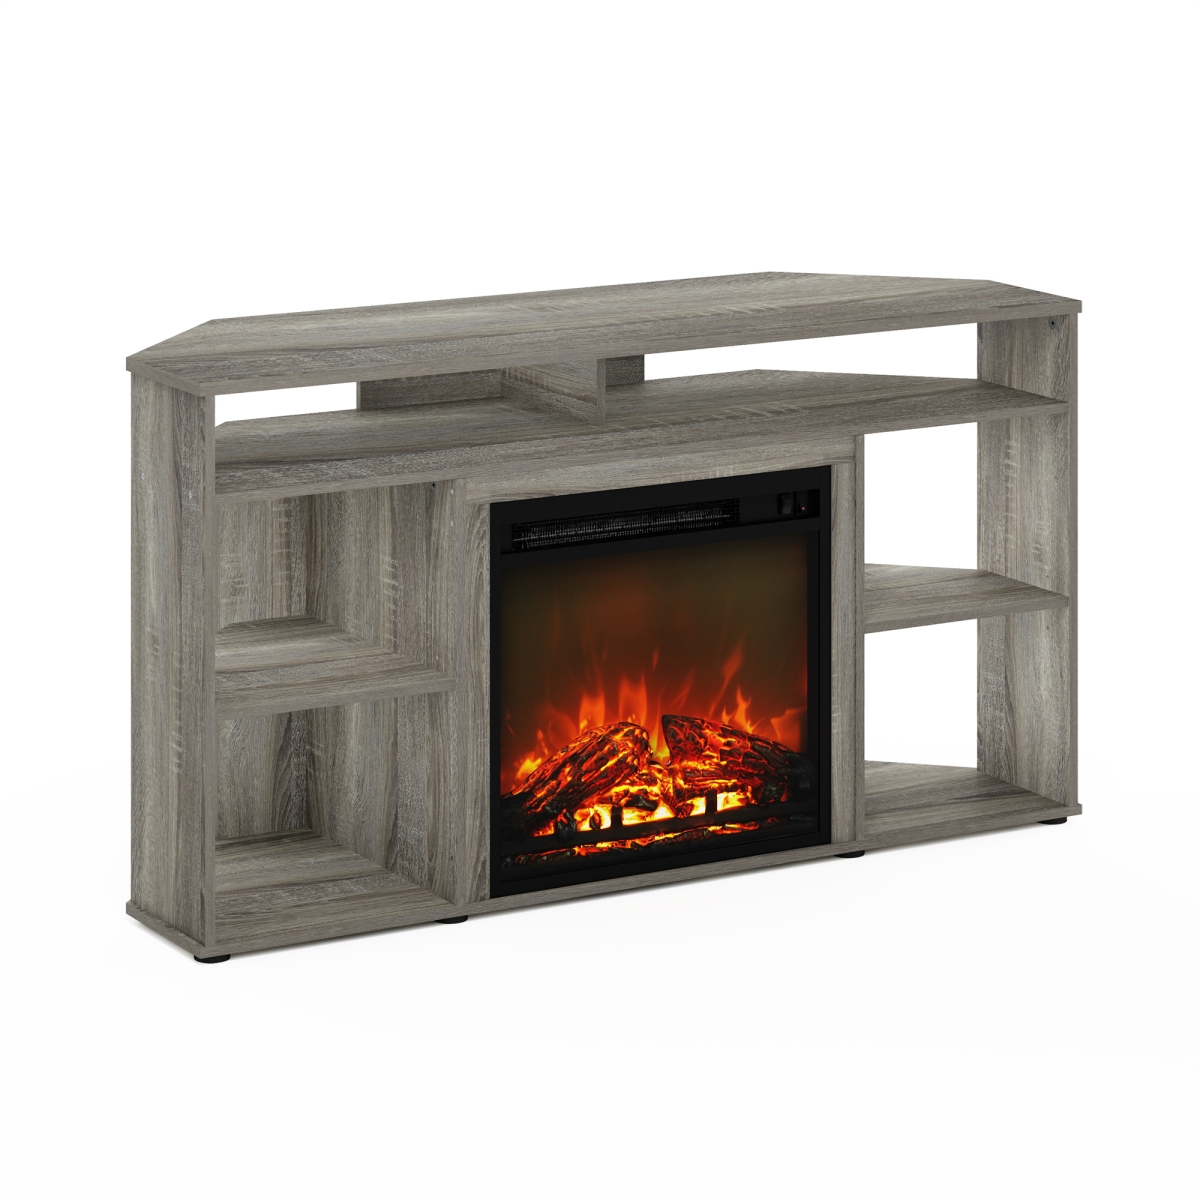 Jensen Corner TV Stand with Fireplace for TV up to 55 in., French Oak Grey -  LRL, LR3035447